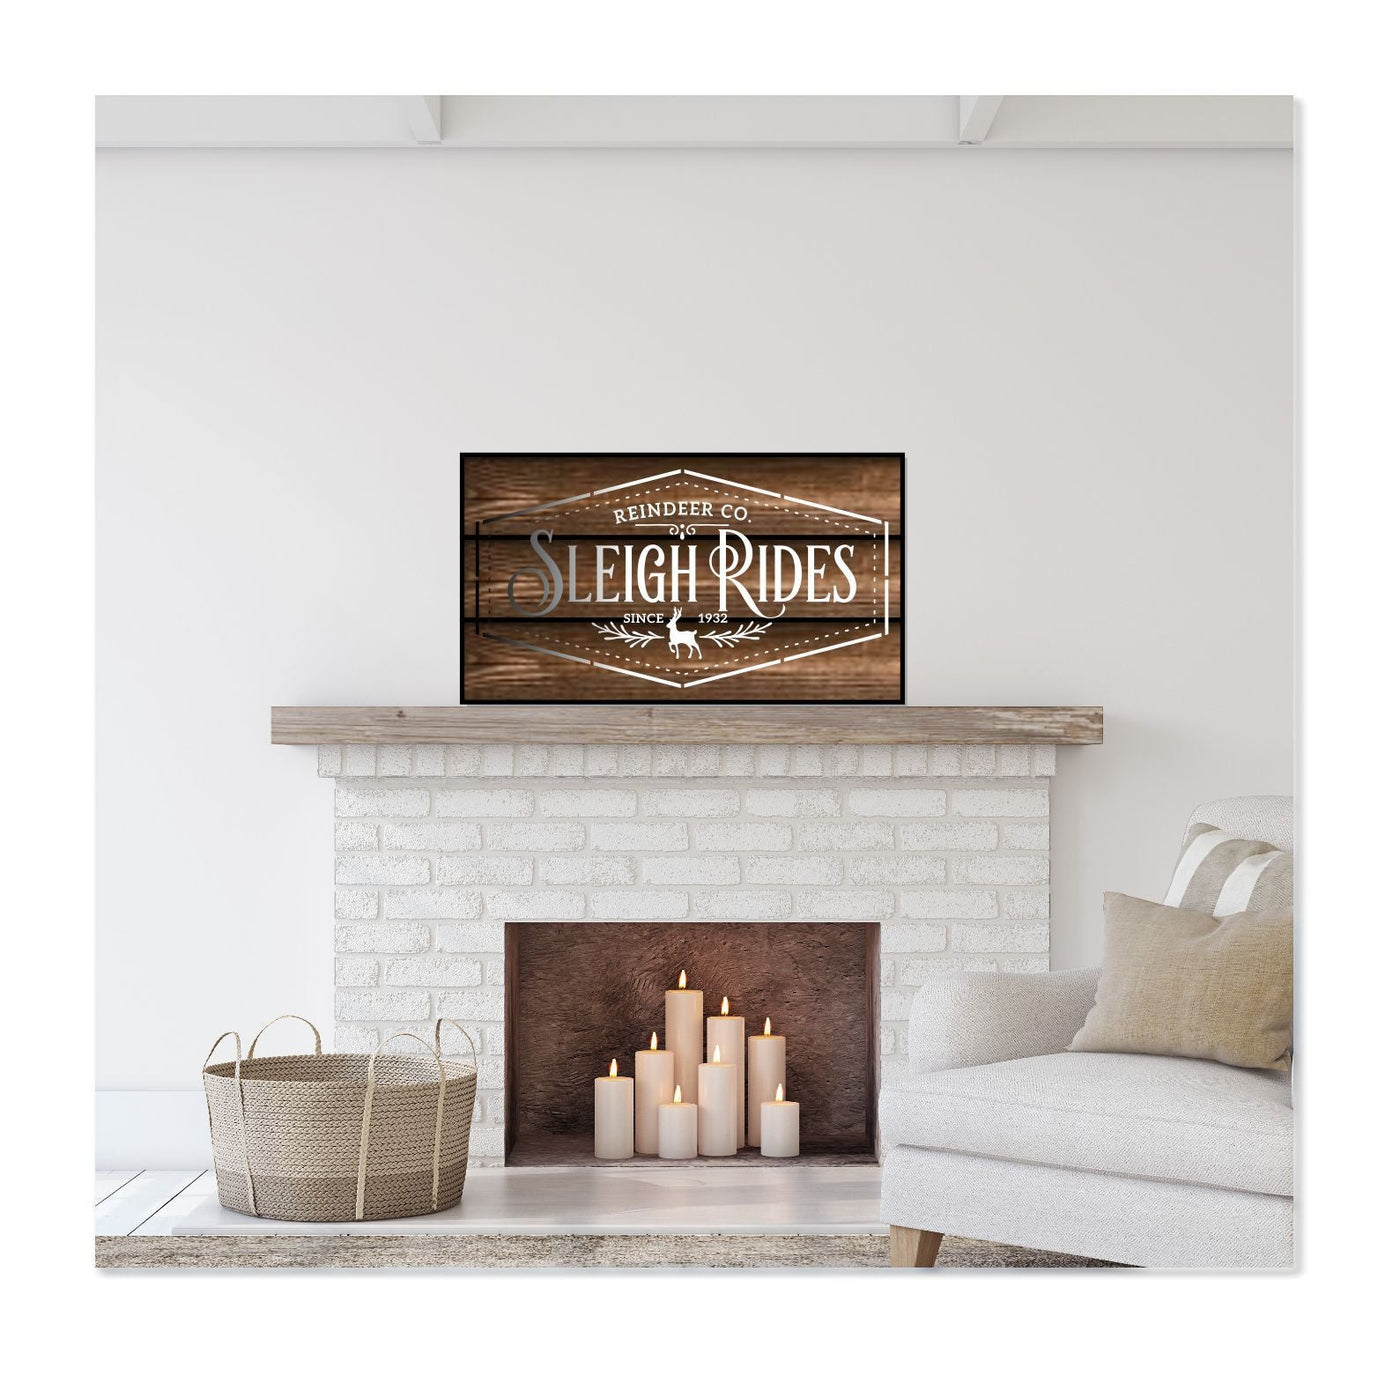 WHIMSICAL WINTER RUSTIC PALLET SIGNS